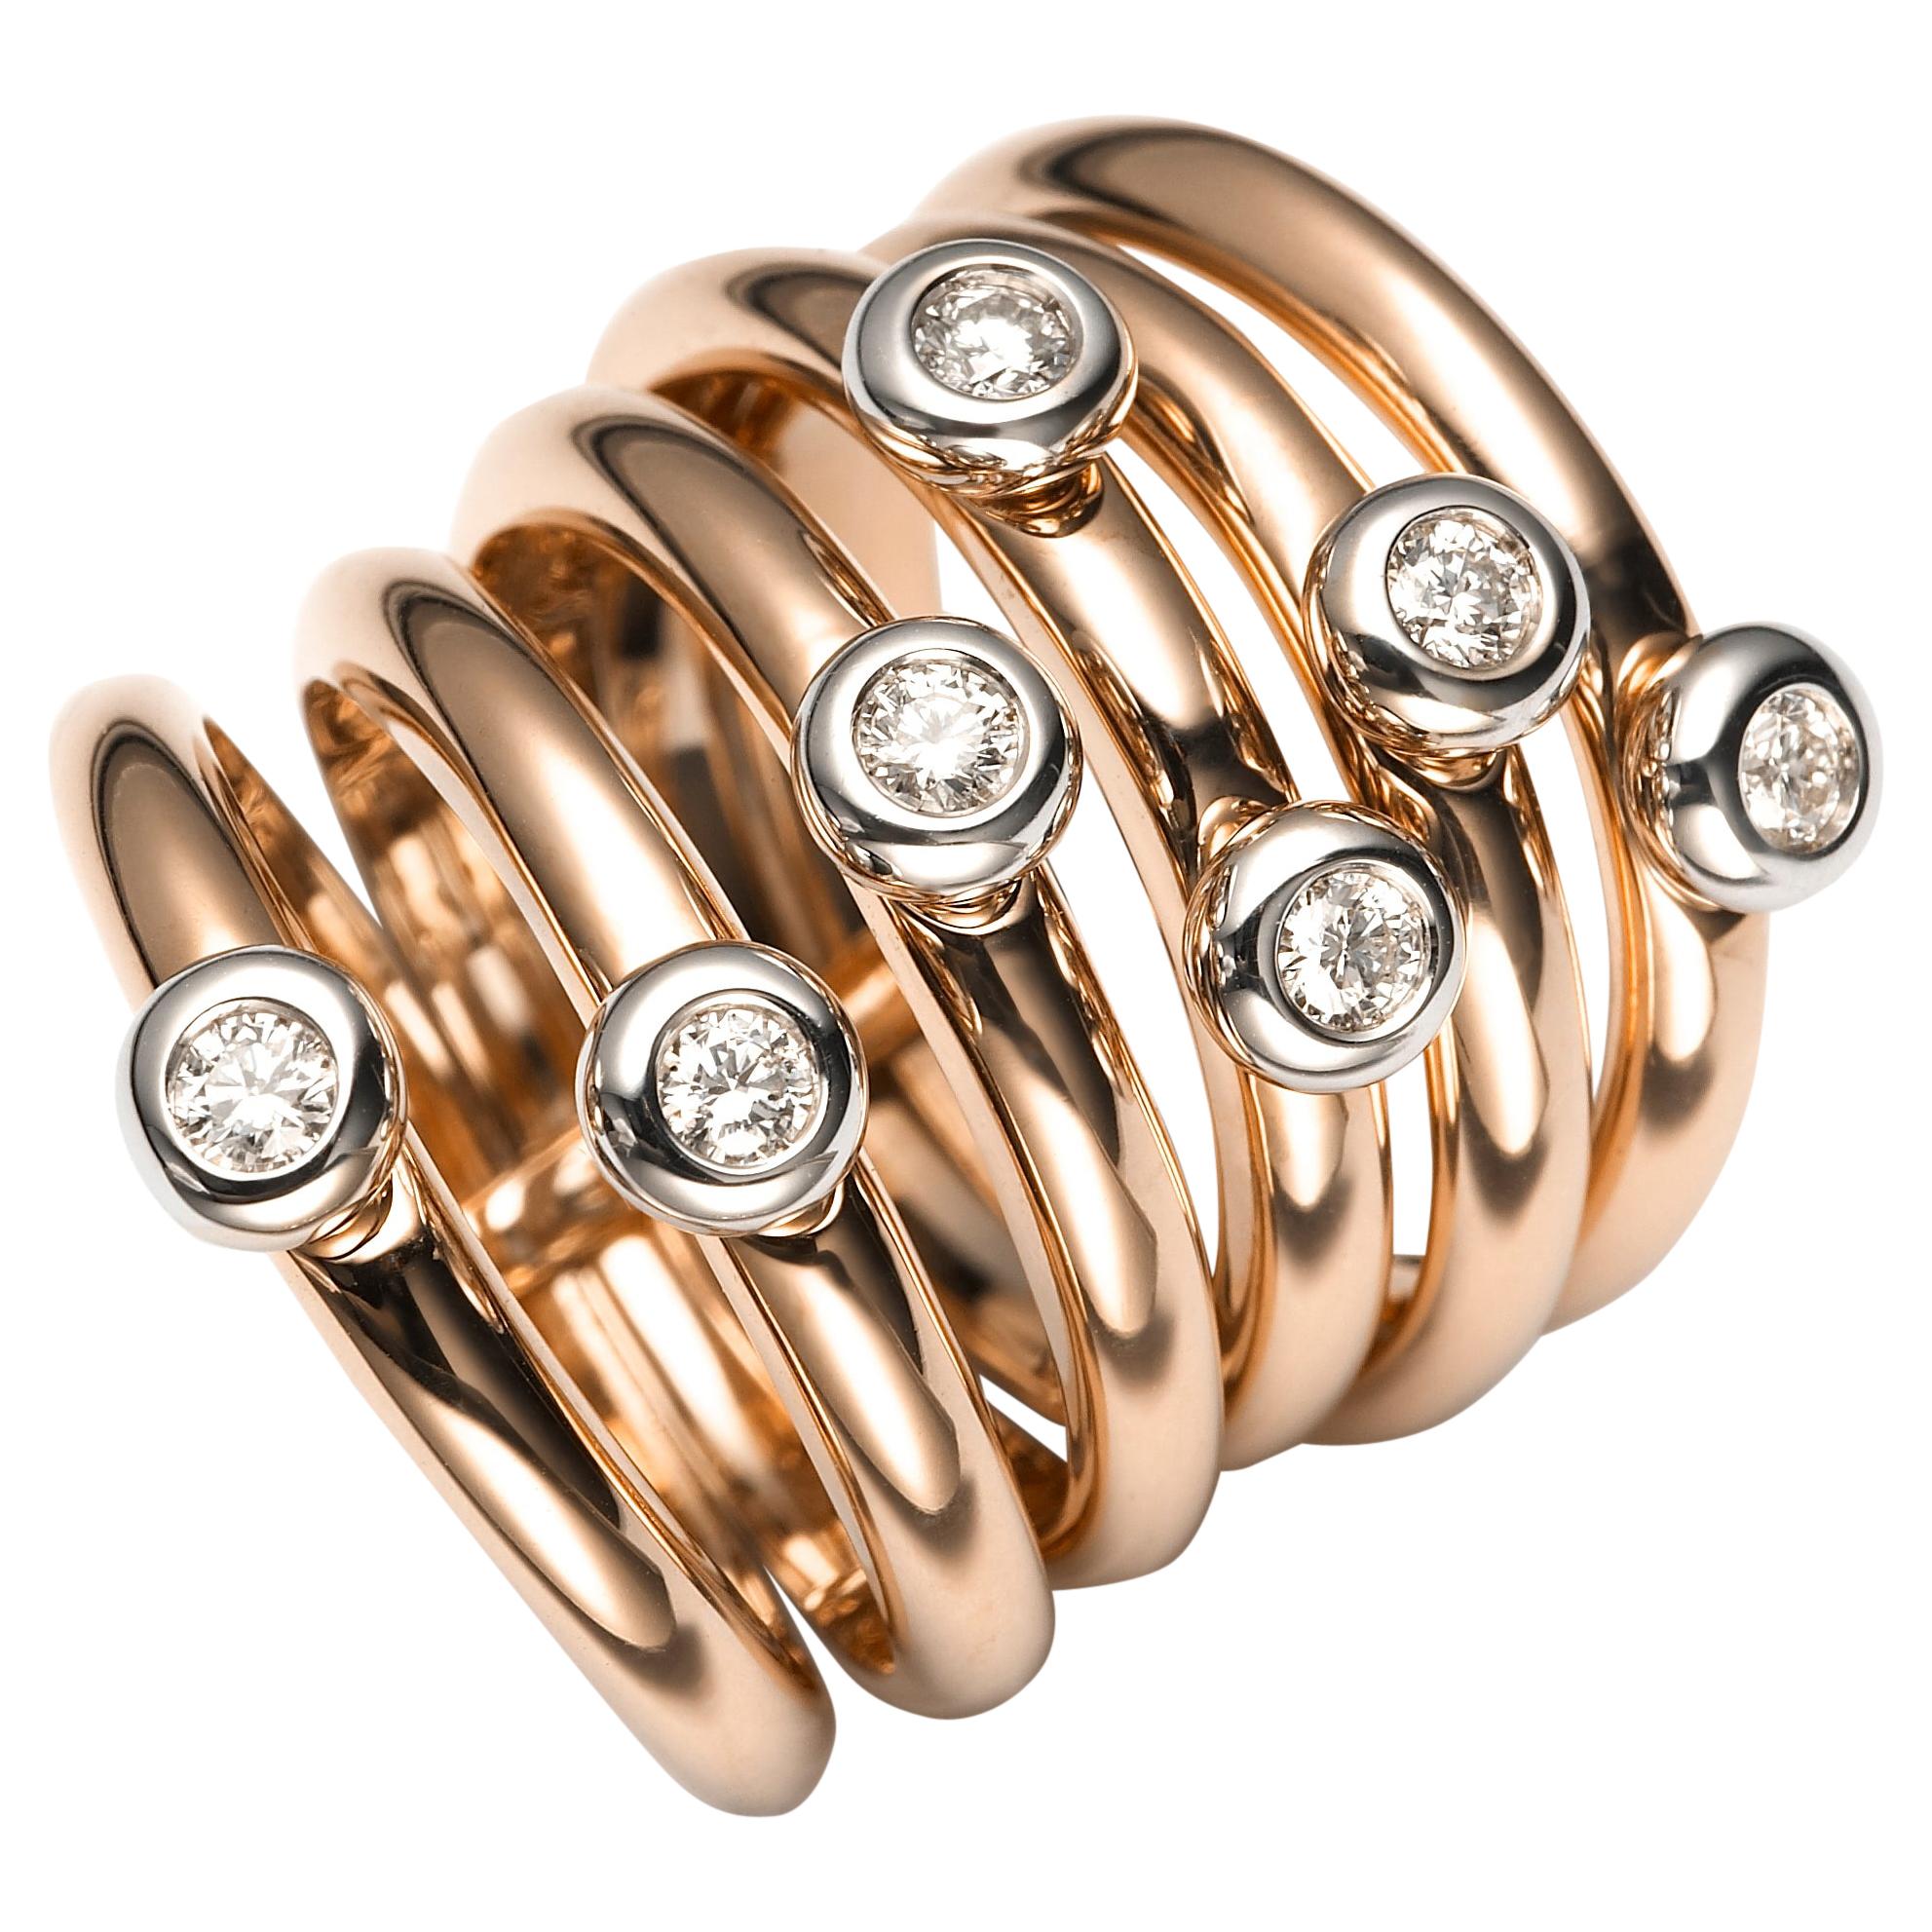 For Sale:  Mattioli Tibet Ring in Rose Gold, White Gold Bezels and White Diamonds